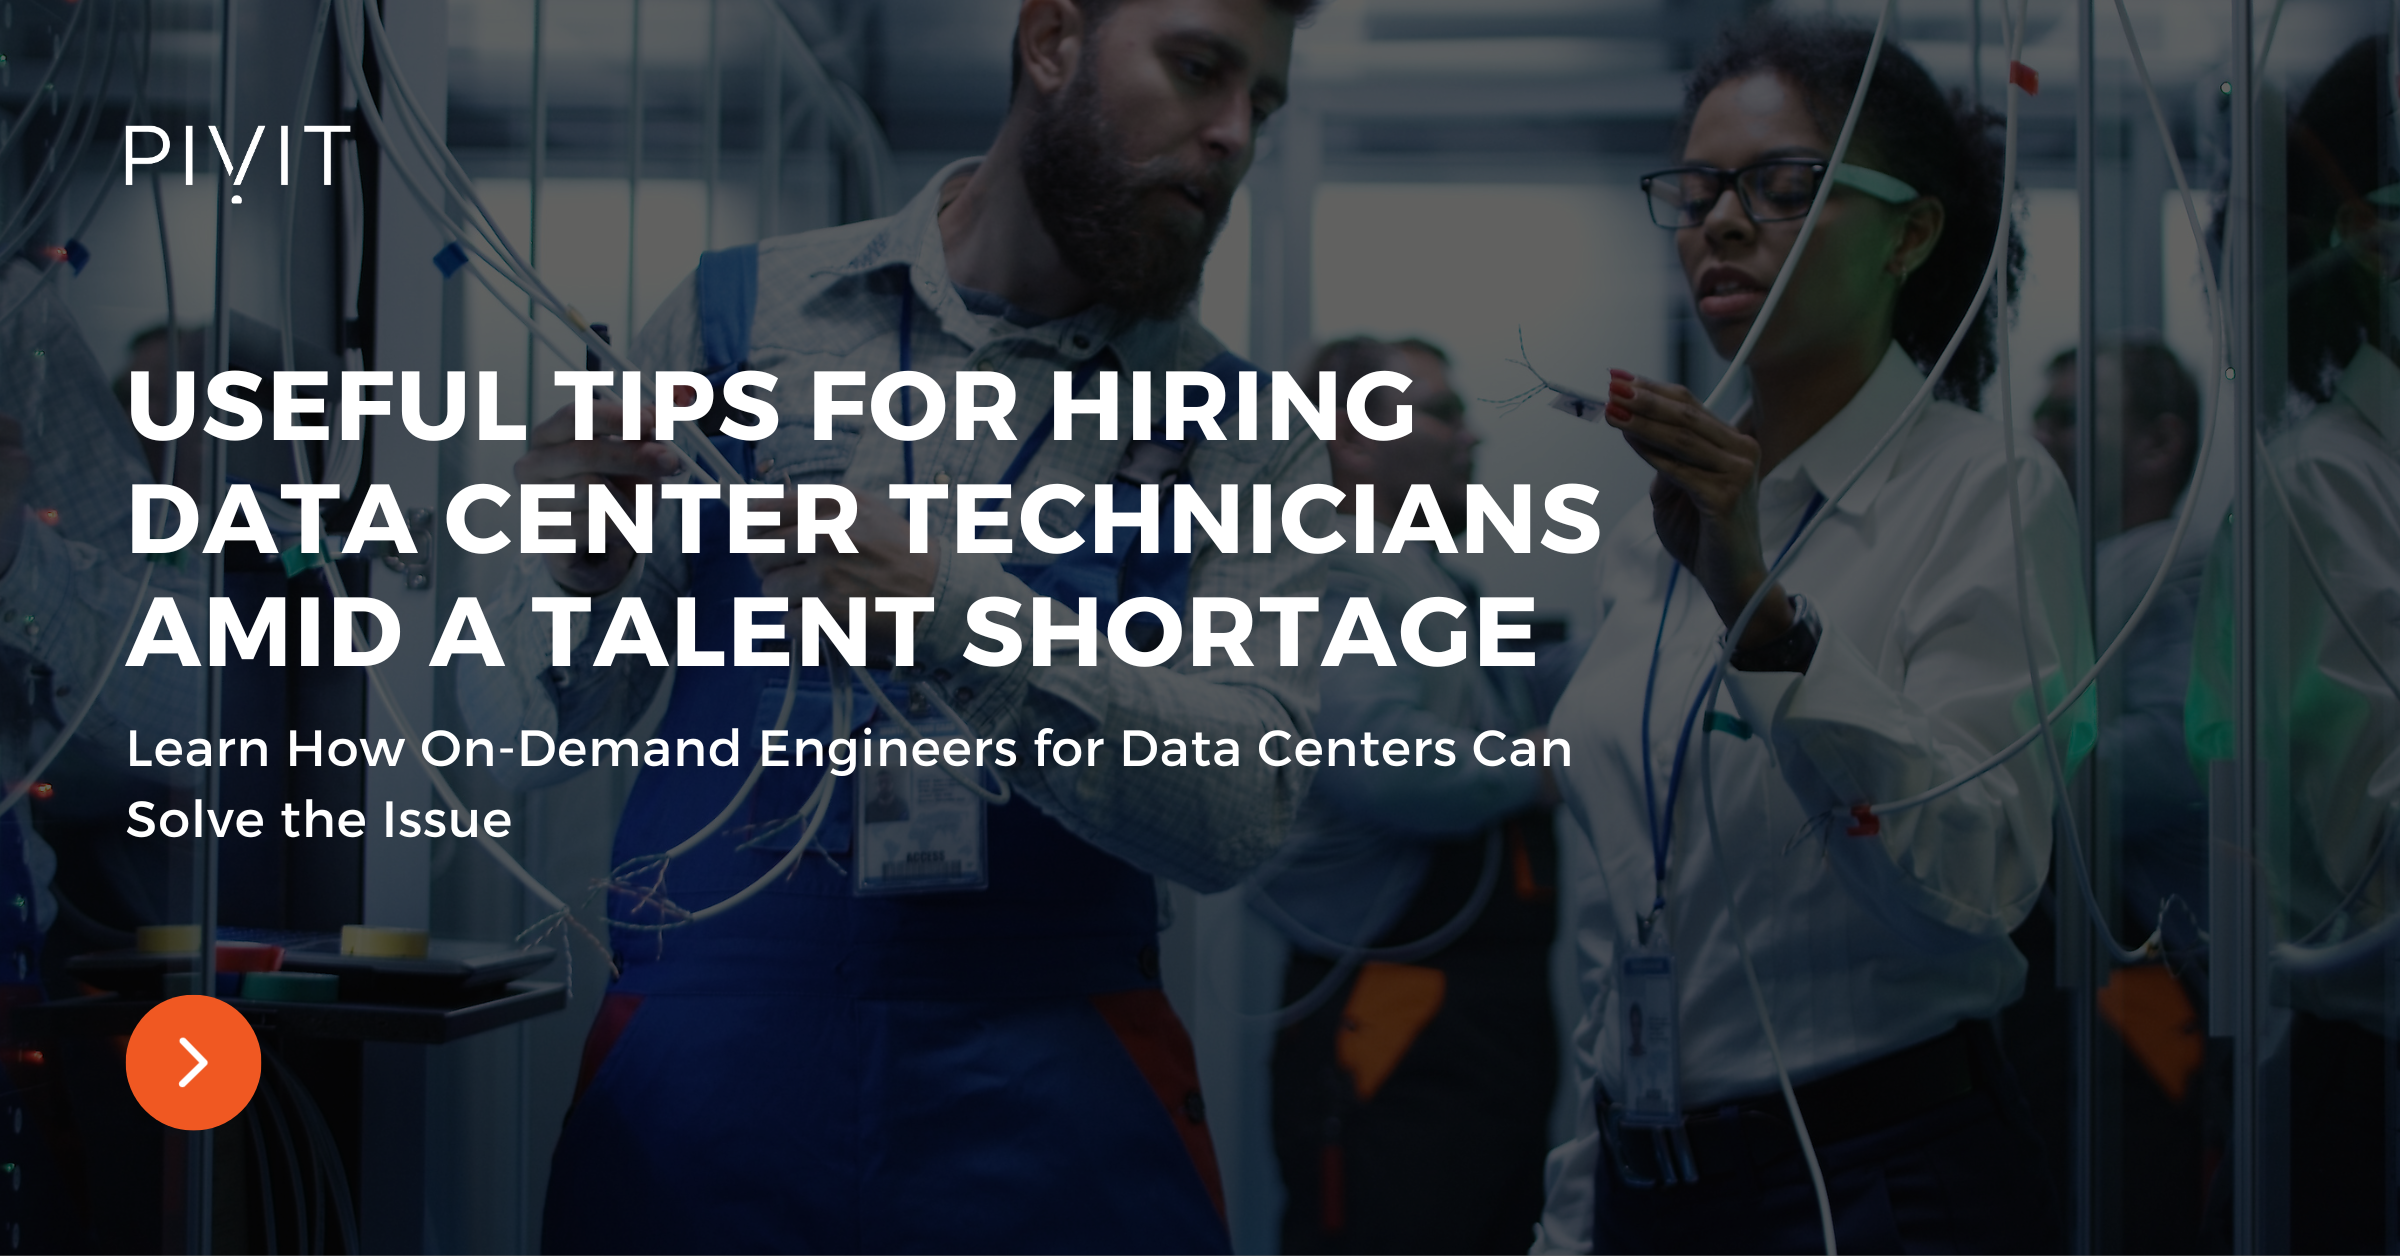 Useful Tips for Hiring Data Center Technicians Amid a Talent Shortage - Learn How On-Demand Engineers for Data Centers Can Solve the Issue